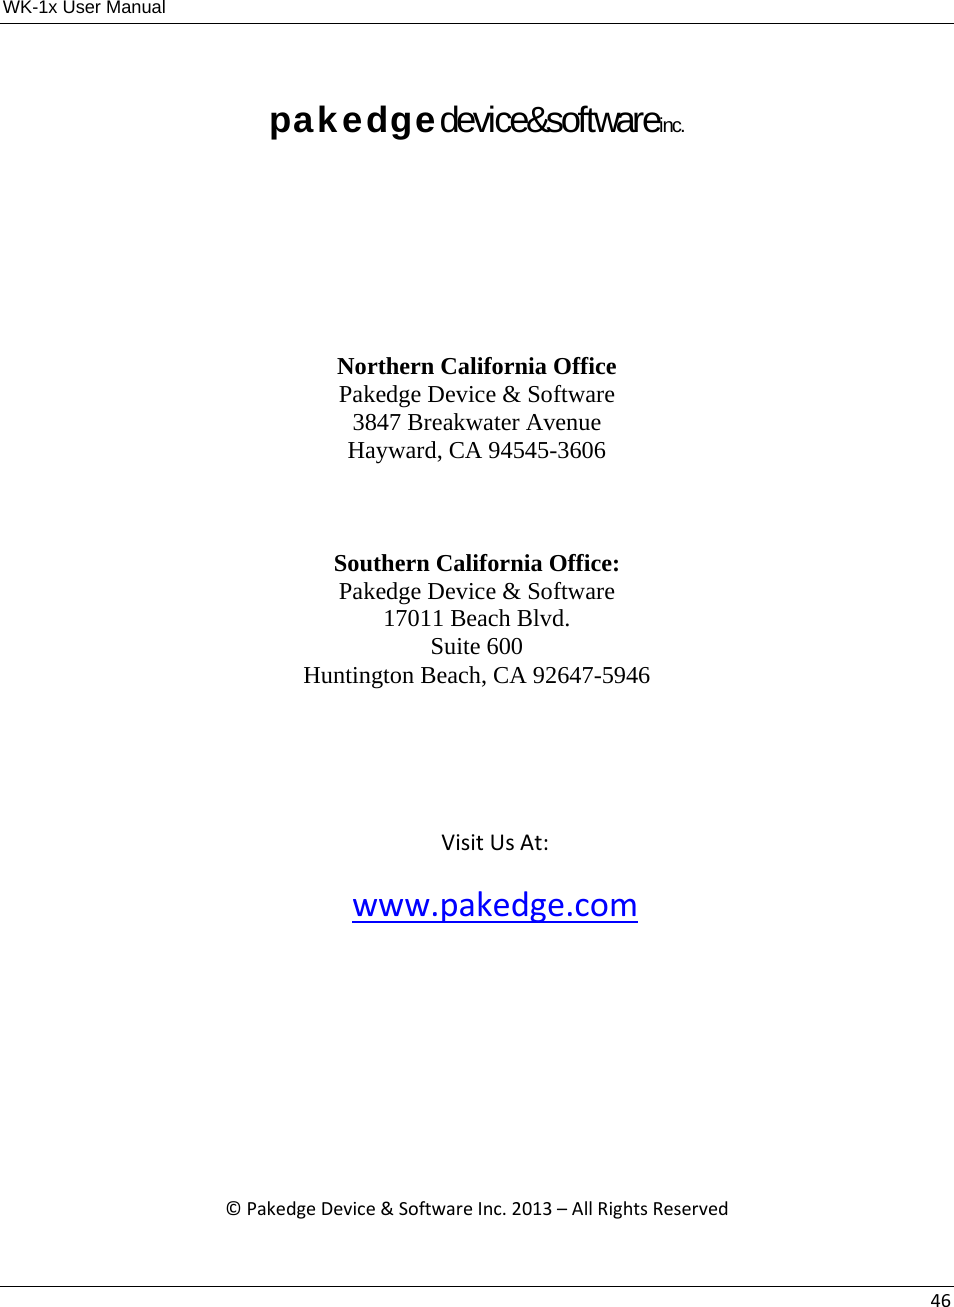 WK-1x User Manual 46pakedgedevice&amp;softwareinc.     Northern California Office Pakedge Device &amp; Software 3847 Breakwater Avenue Hayward, CA 94545-3606  Southern California Office: Pakedge Device &amp; Software 17011 Beach Blvd. Suite 600 Huntington Beach, CA 92647-5946  VisitUsAt:www.pakedge.com©PakedgeDevice&amp;SoftwareInc.2013–AllRightsReserved